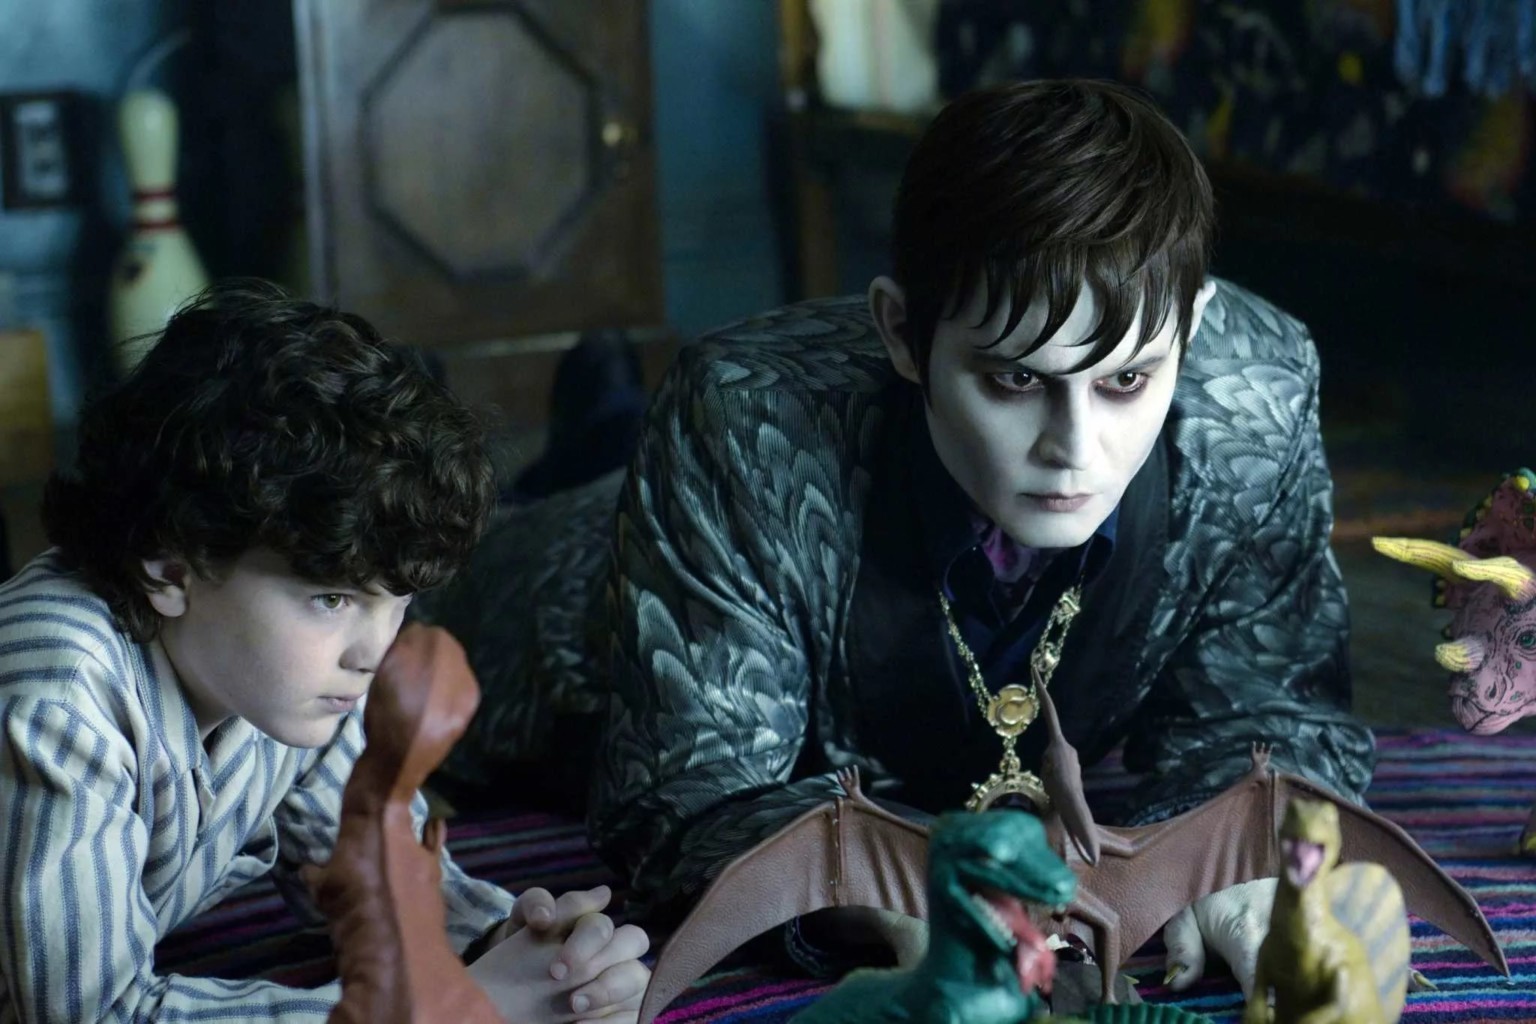 Continuation of the post Review of Tim Burton's Tragicomedy of 2012 and the Failed Reincarnation of Dark Shadows - My, Vampires, Film Dark Shadows, Horror, Witches, Thriller, Tragicomedy, Tim Burton, Johnny Depp, Mystic, Unrequited love, Reply to post, Longpost